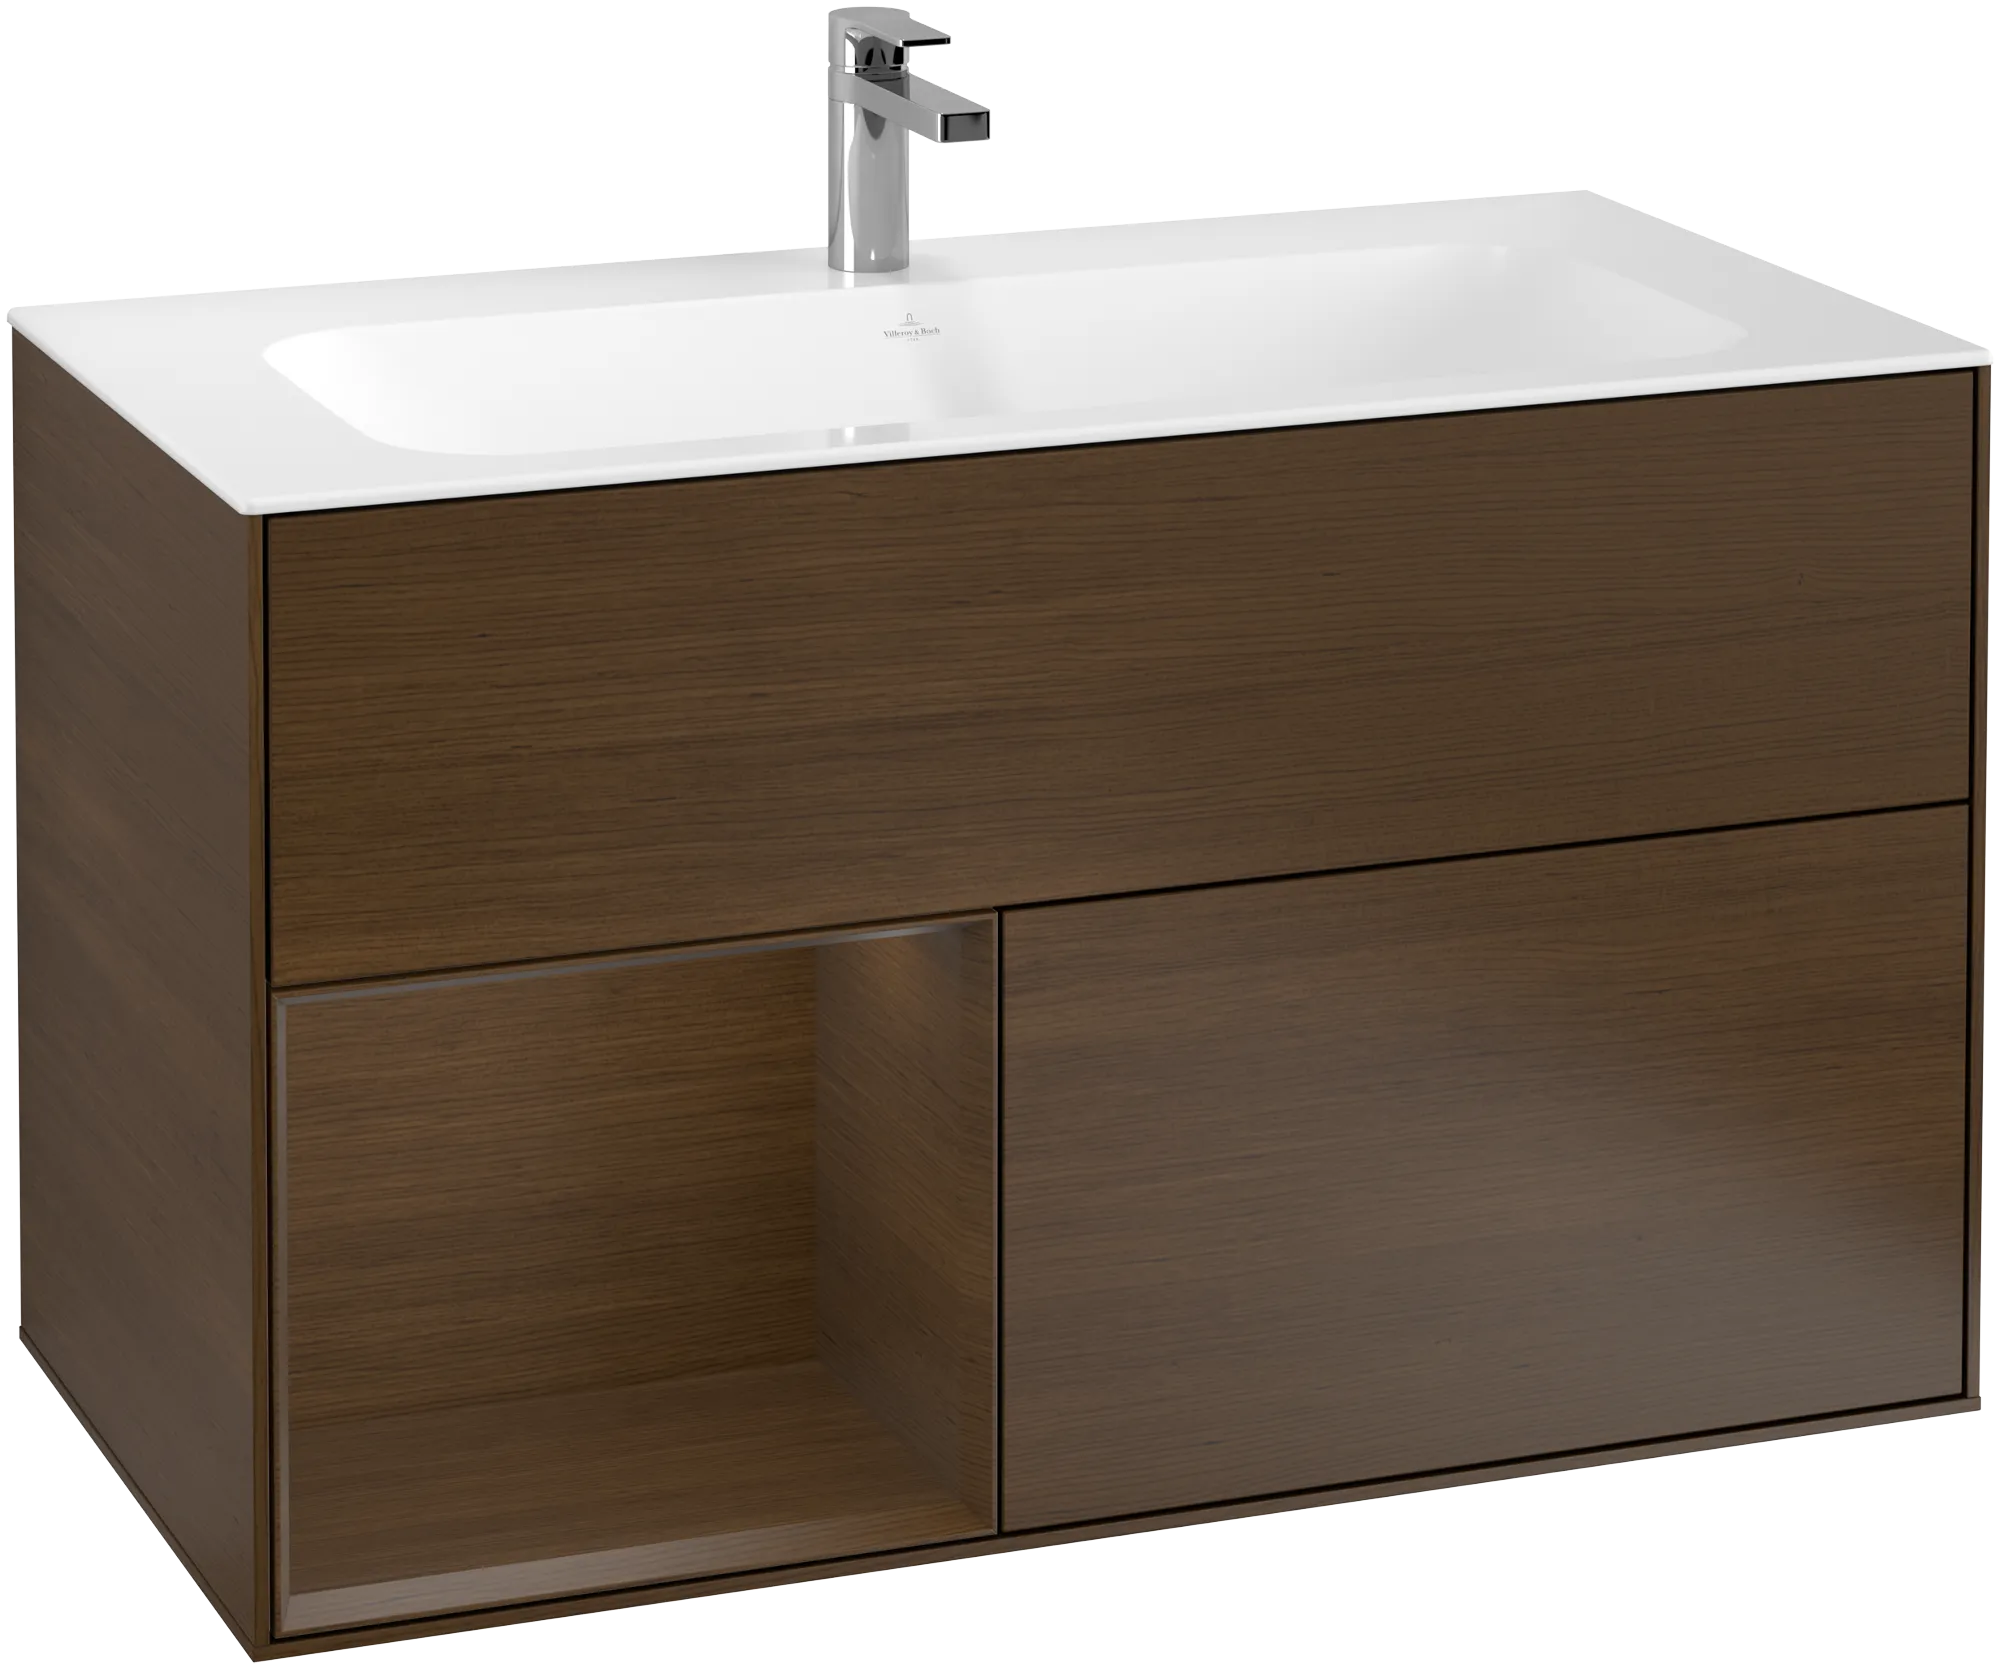 Picture of VILLEROY BOCH Finion Vanity unit, with lighting, 2 pull-out compartments, 996 x 591 x 498 mm, Walnut Veneer / Walnut Veneer #G030GNGN